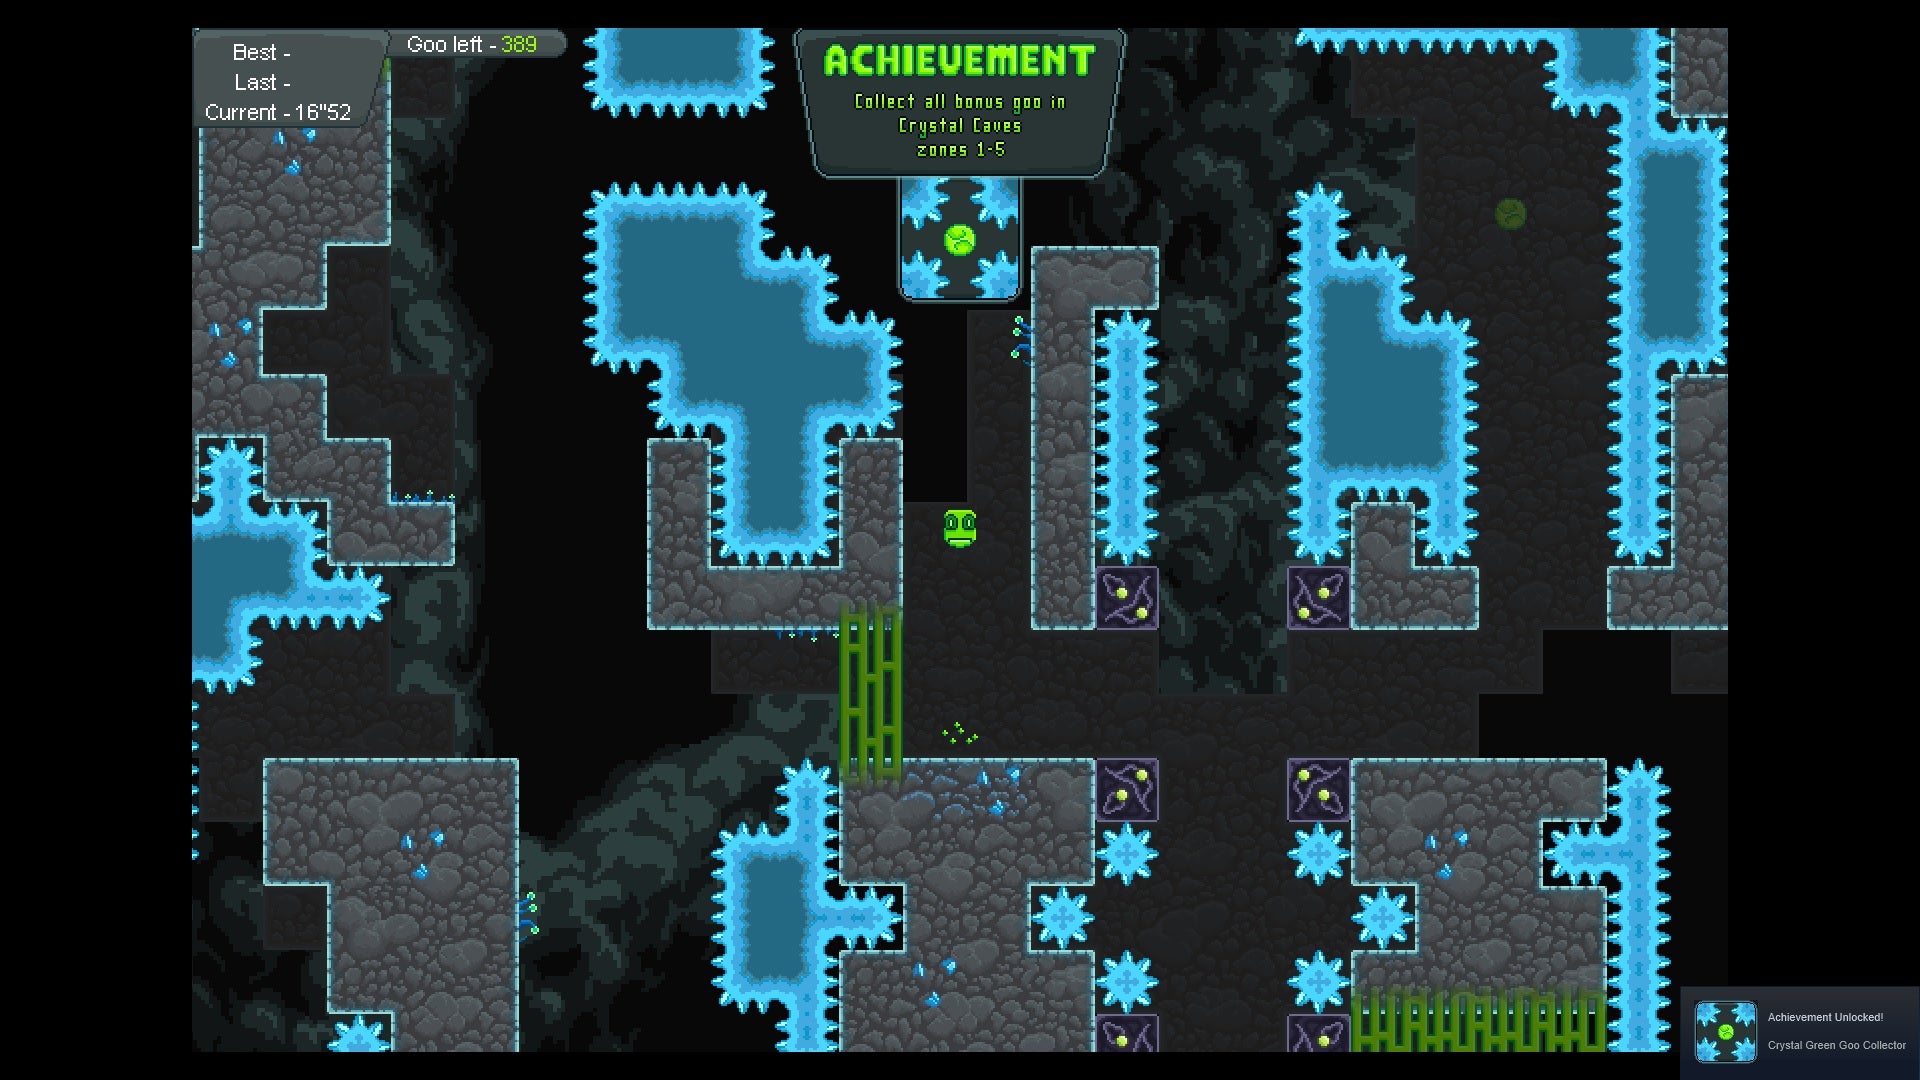 A level in The True Slime King platformer - the little green slime king is in the centre and the level itself is full of blocks of spiked ice